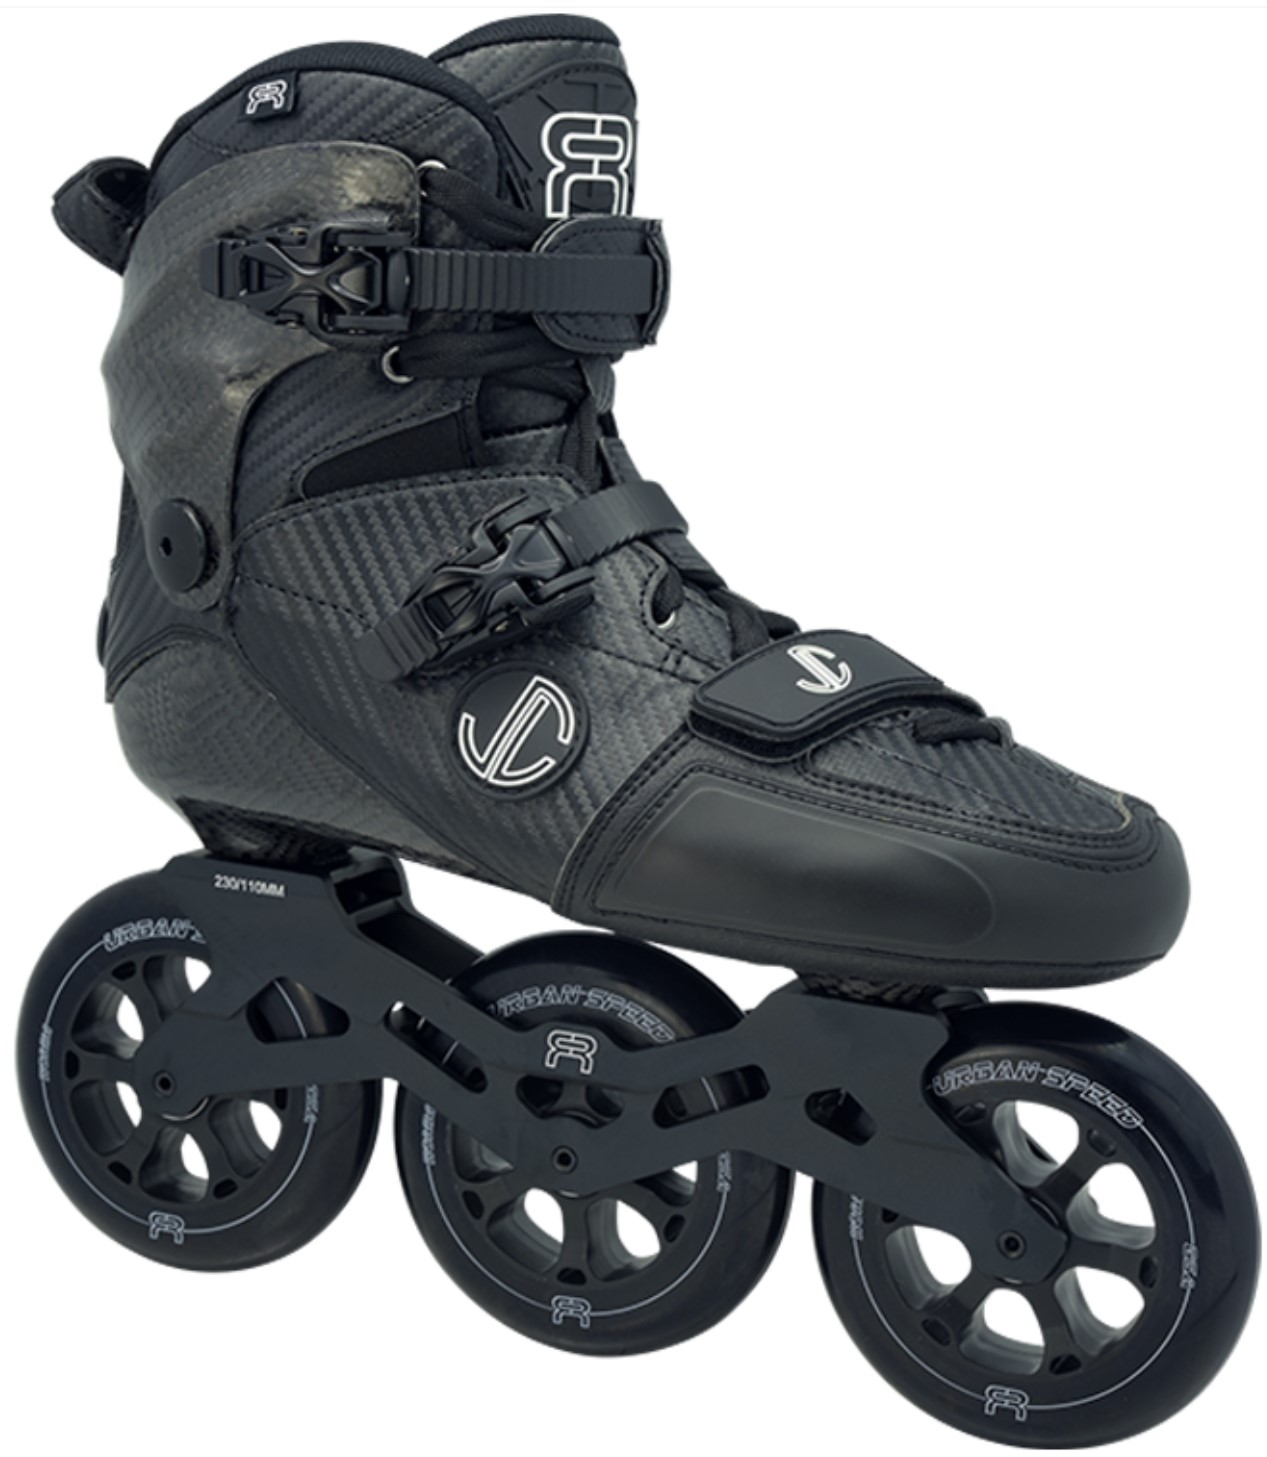 FR SL 310 inline skate model 2021 for freeride and speed slalom with carbon boot and carbon cuff and flat 3 wheel frame